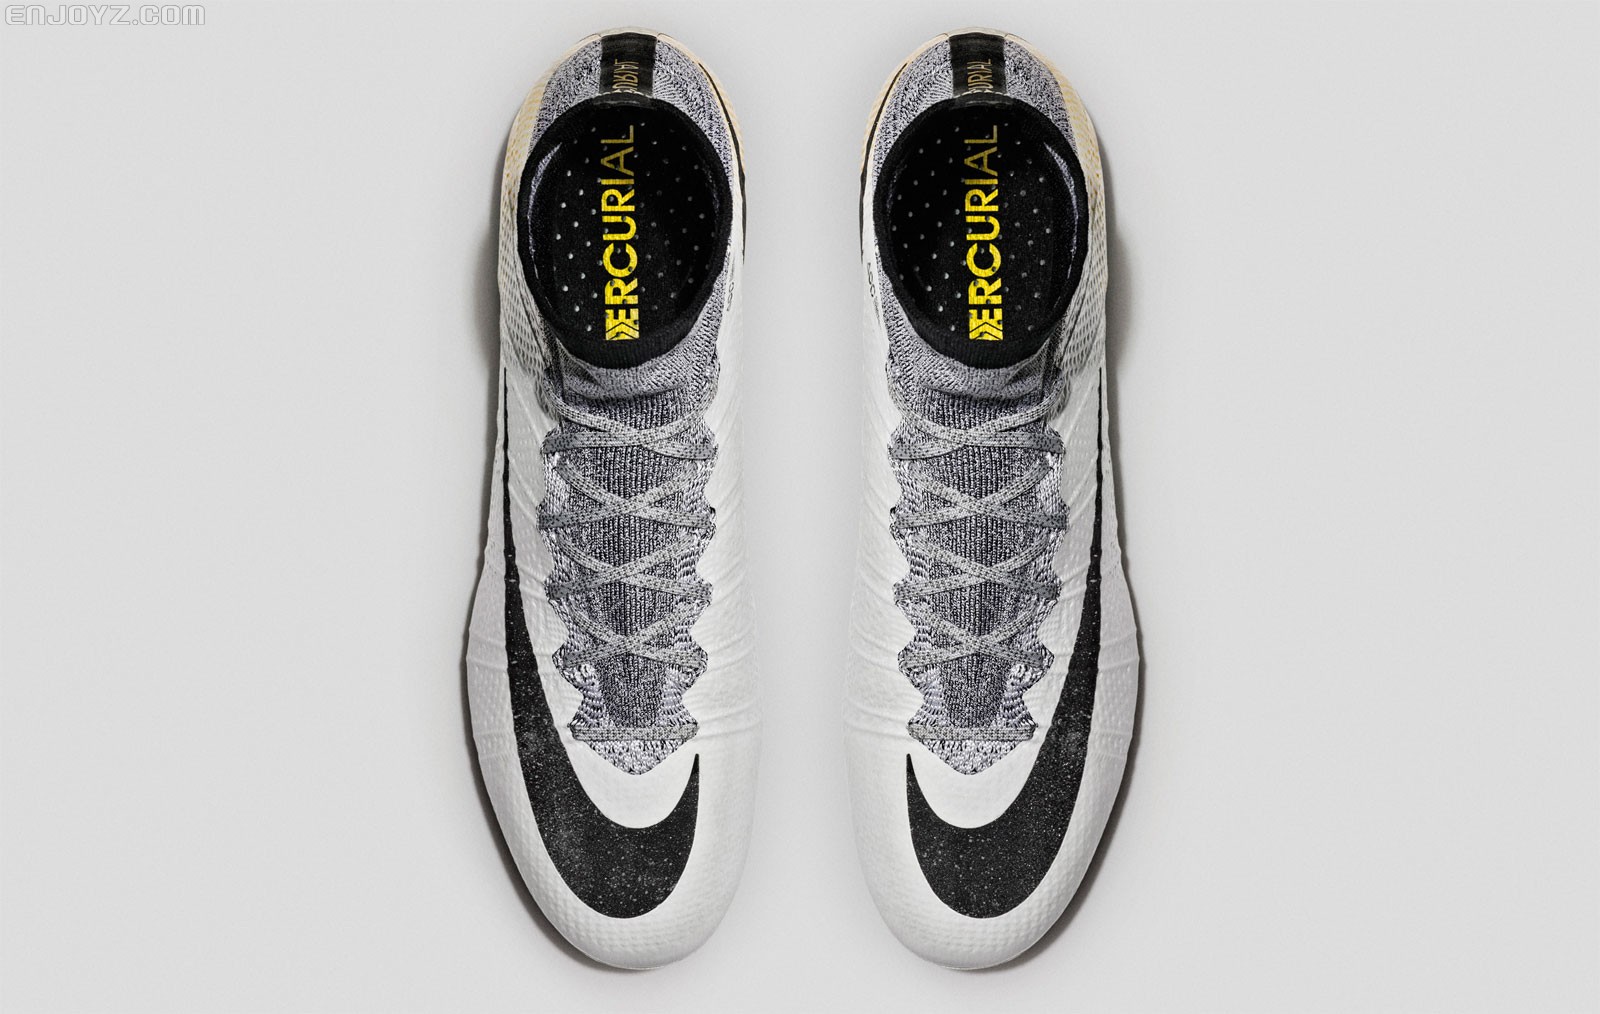 nike-mercurial-superfly-cr7-324k-gold-boots-2.jpg